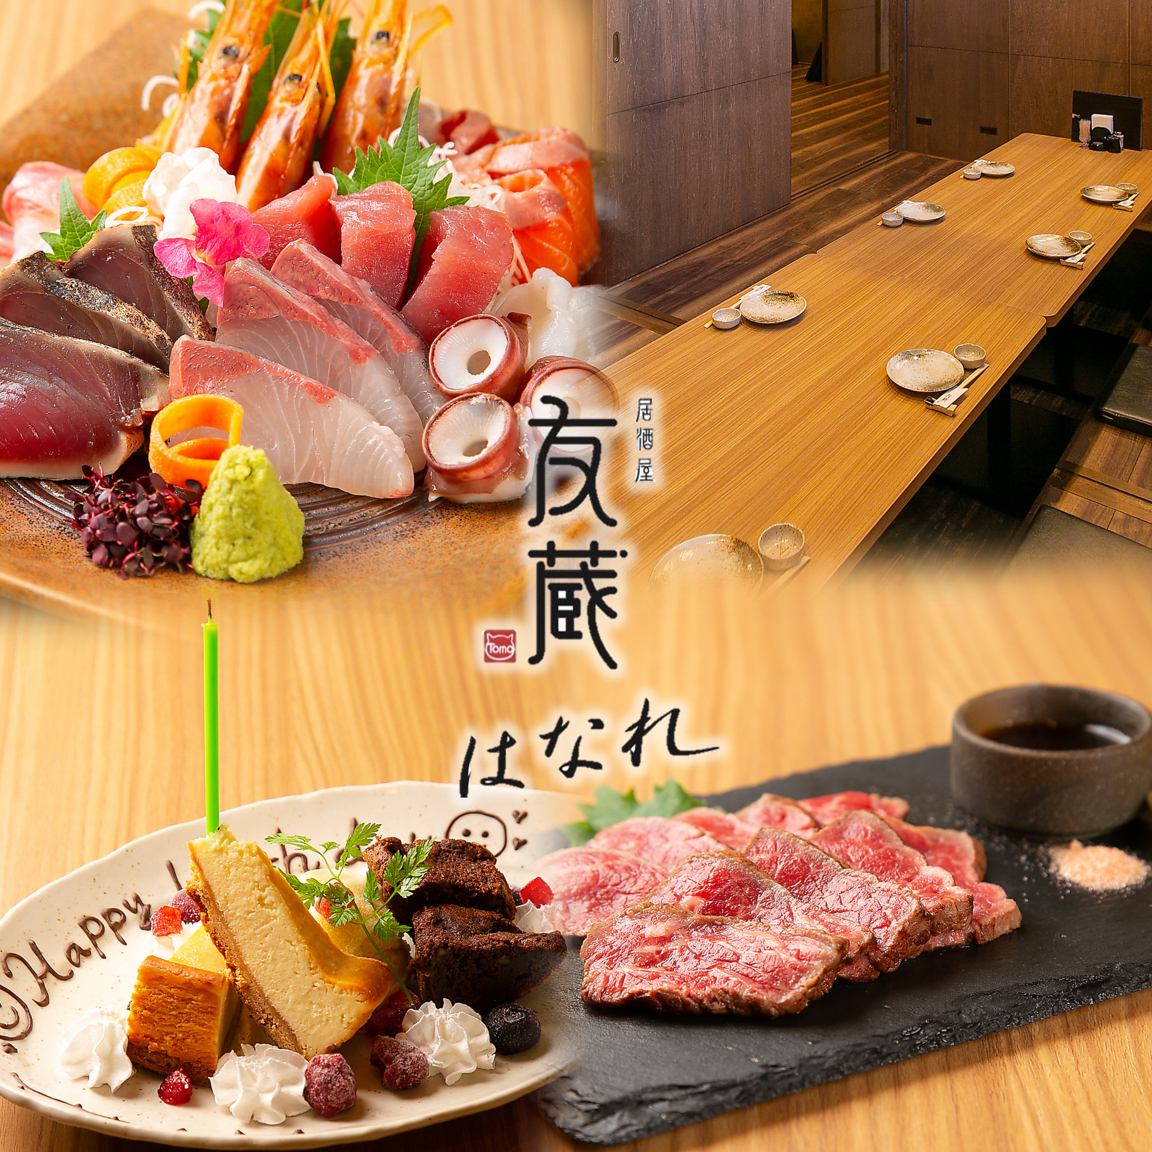 In a private room, you can fully enjoy a variety of alcoholic beverages and special dishes made with fresh fish, Iga beef, and seasonal ingredients.